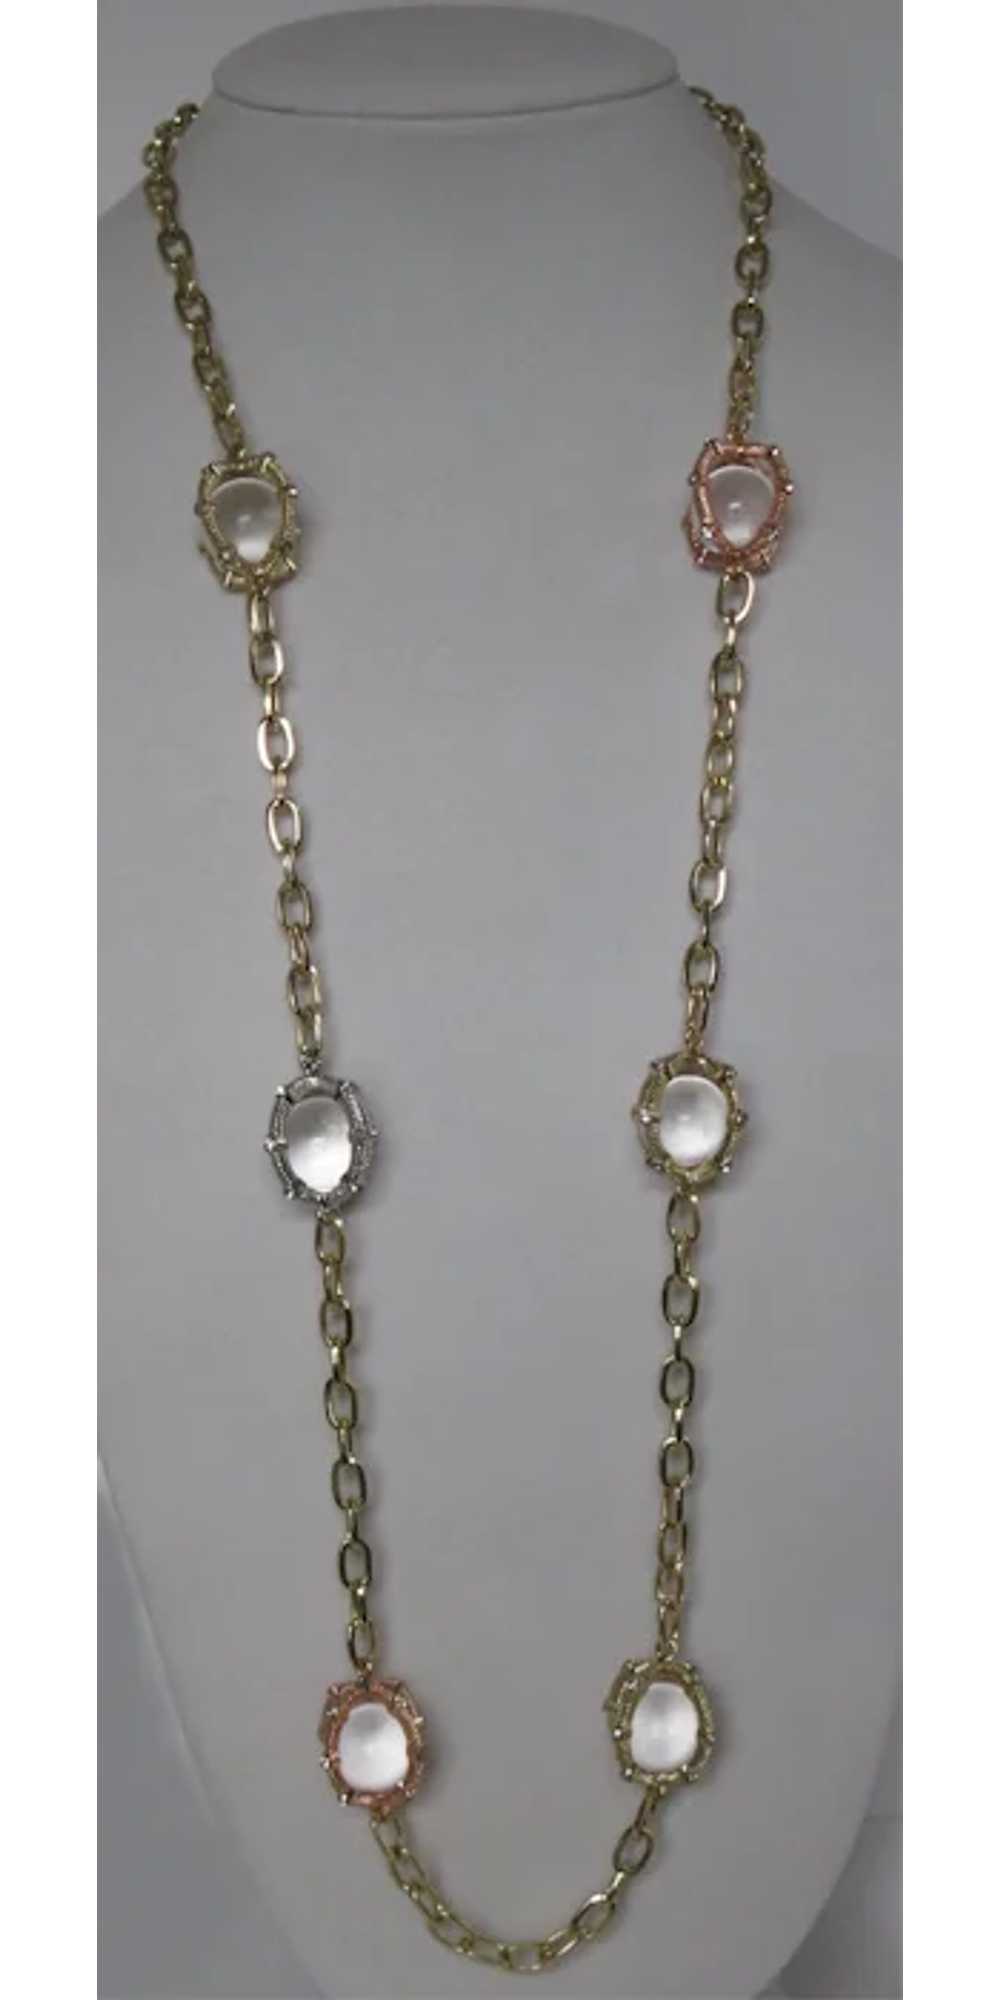 Vintage Pools of Light Necklace RJ Graziano - image 5